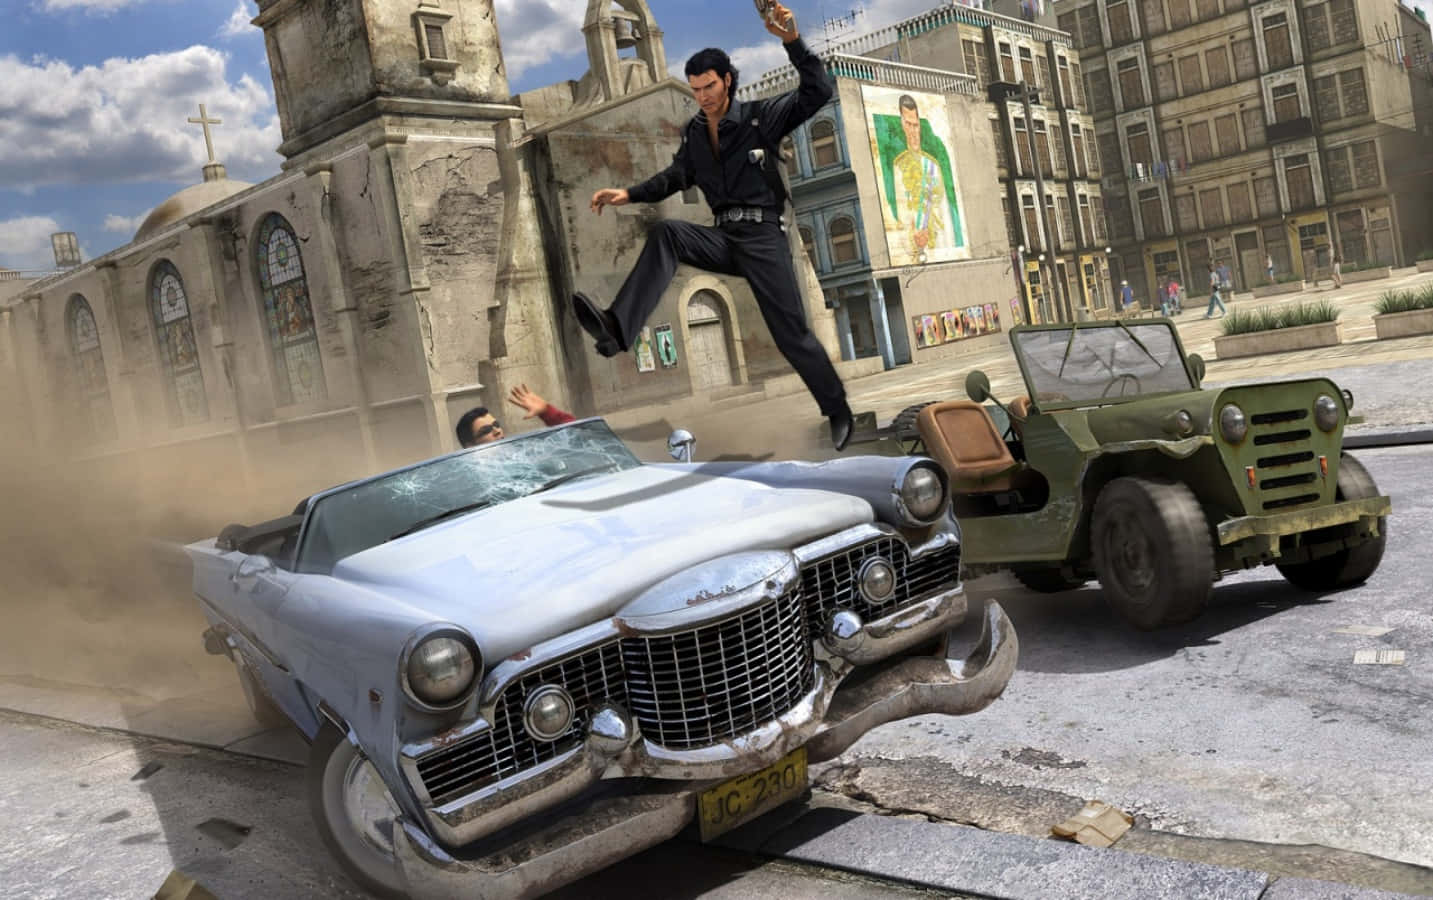 A Man Jumping Over A Car In A City Wallpaper